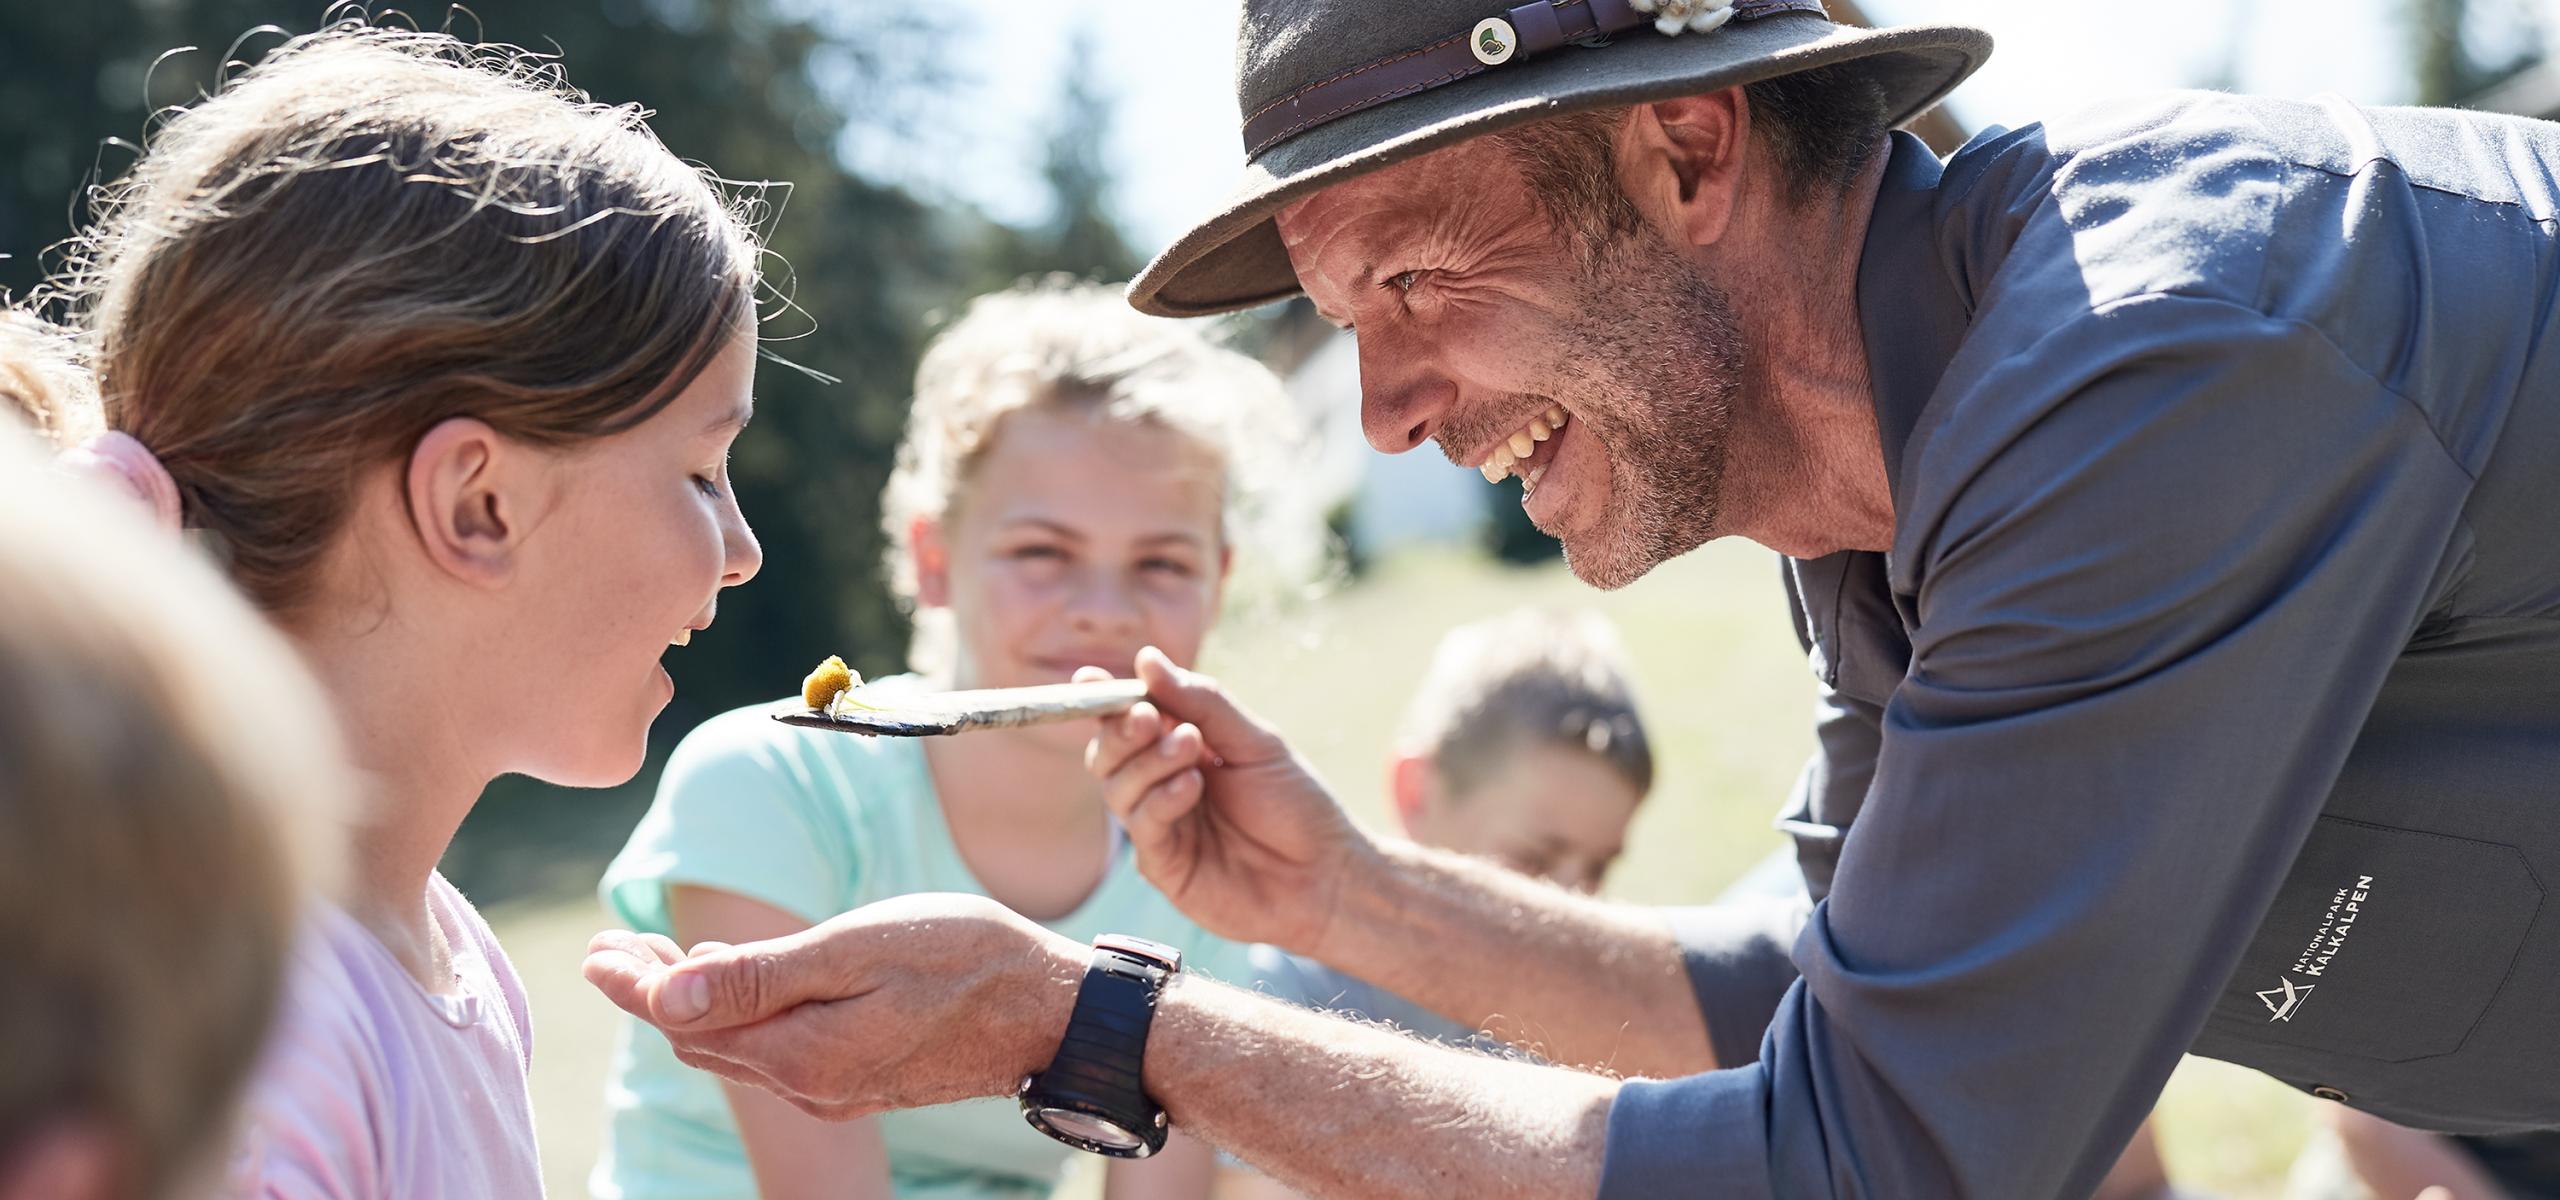 National Park Ranger hands a girl food on a wooden spoon